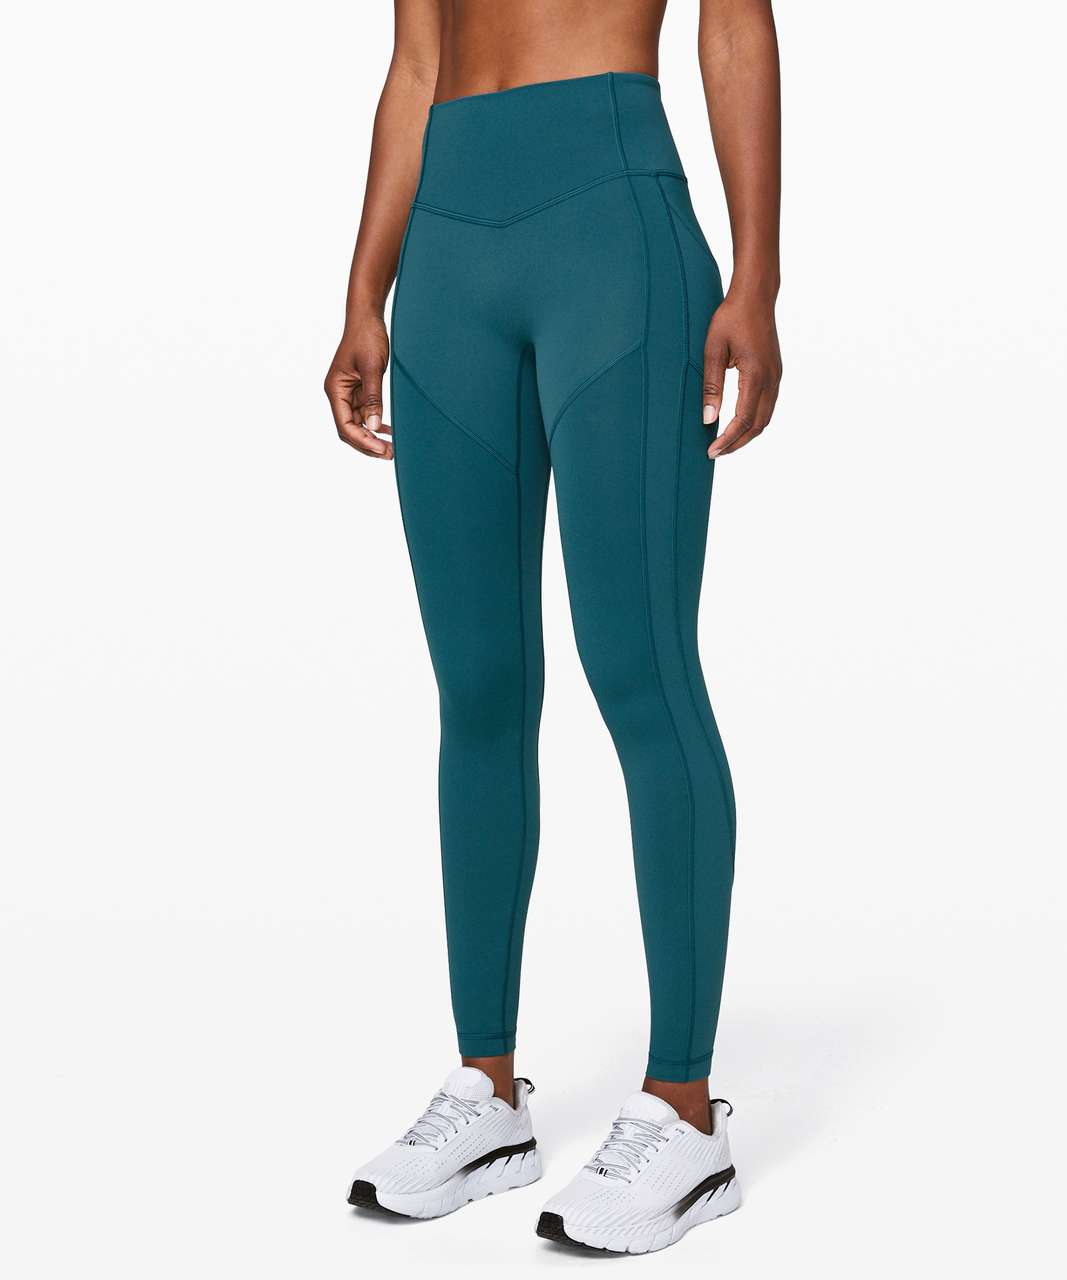 Lululemon All The Right Places Pant II 28" - Bermuda Teal